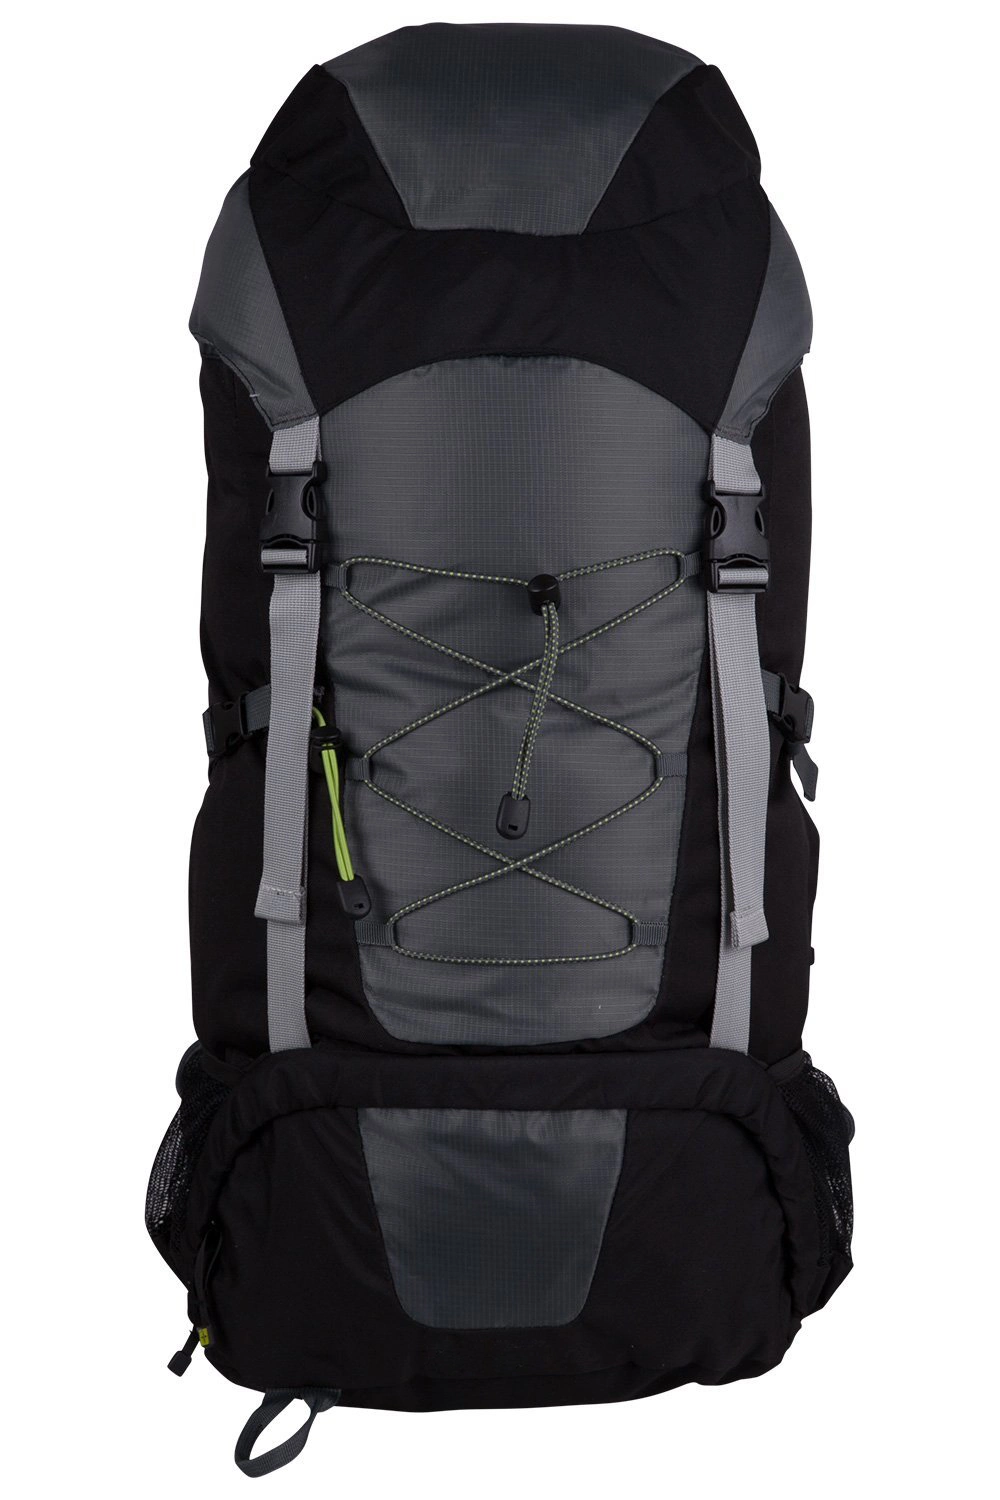 55L Internal Frame Outdoor Hiking Backpack with Rain Cover Rucksack